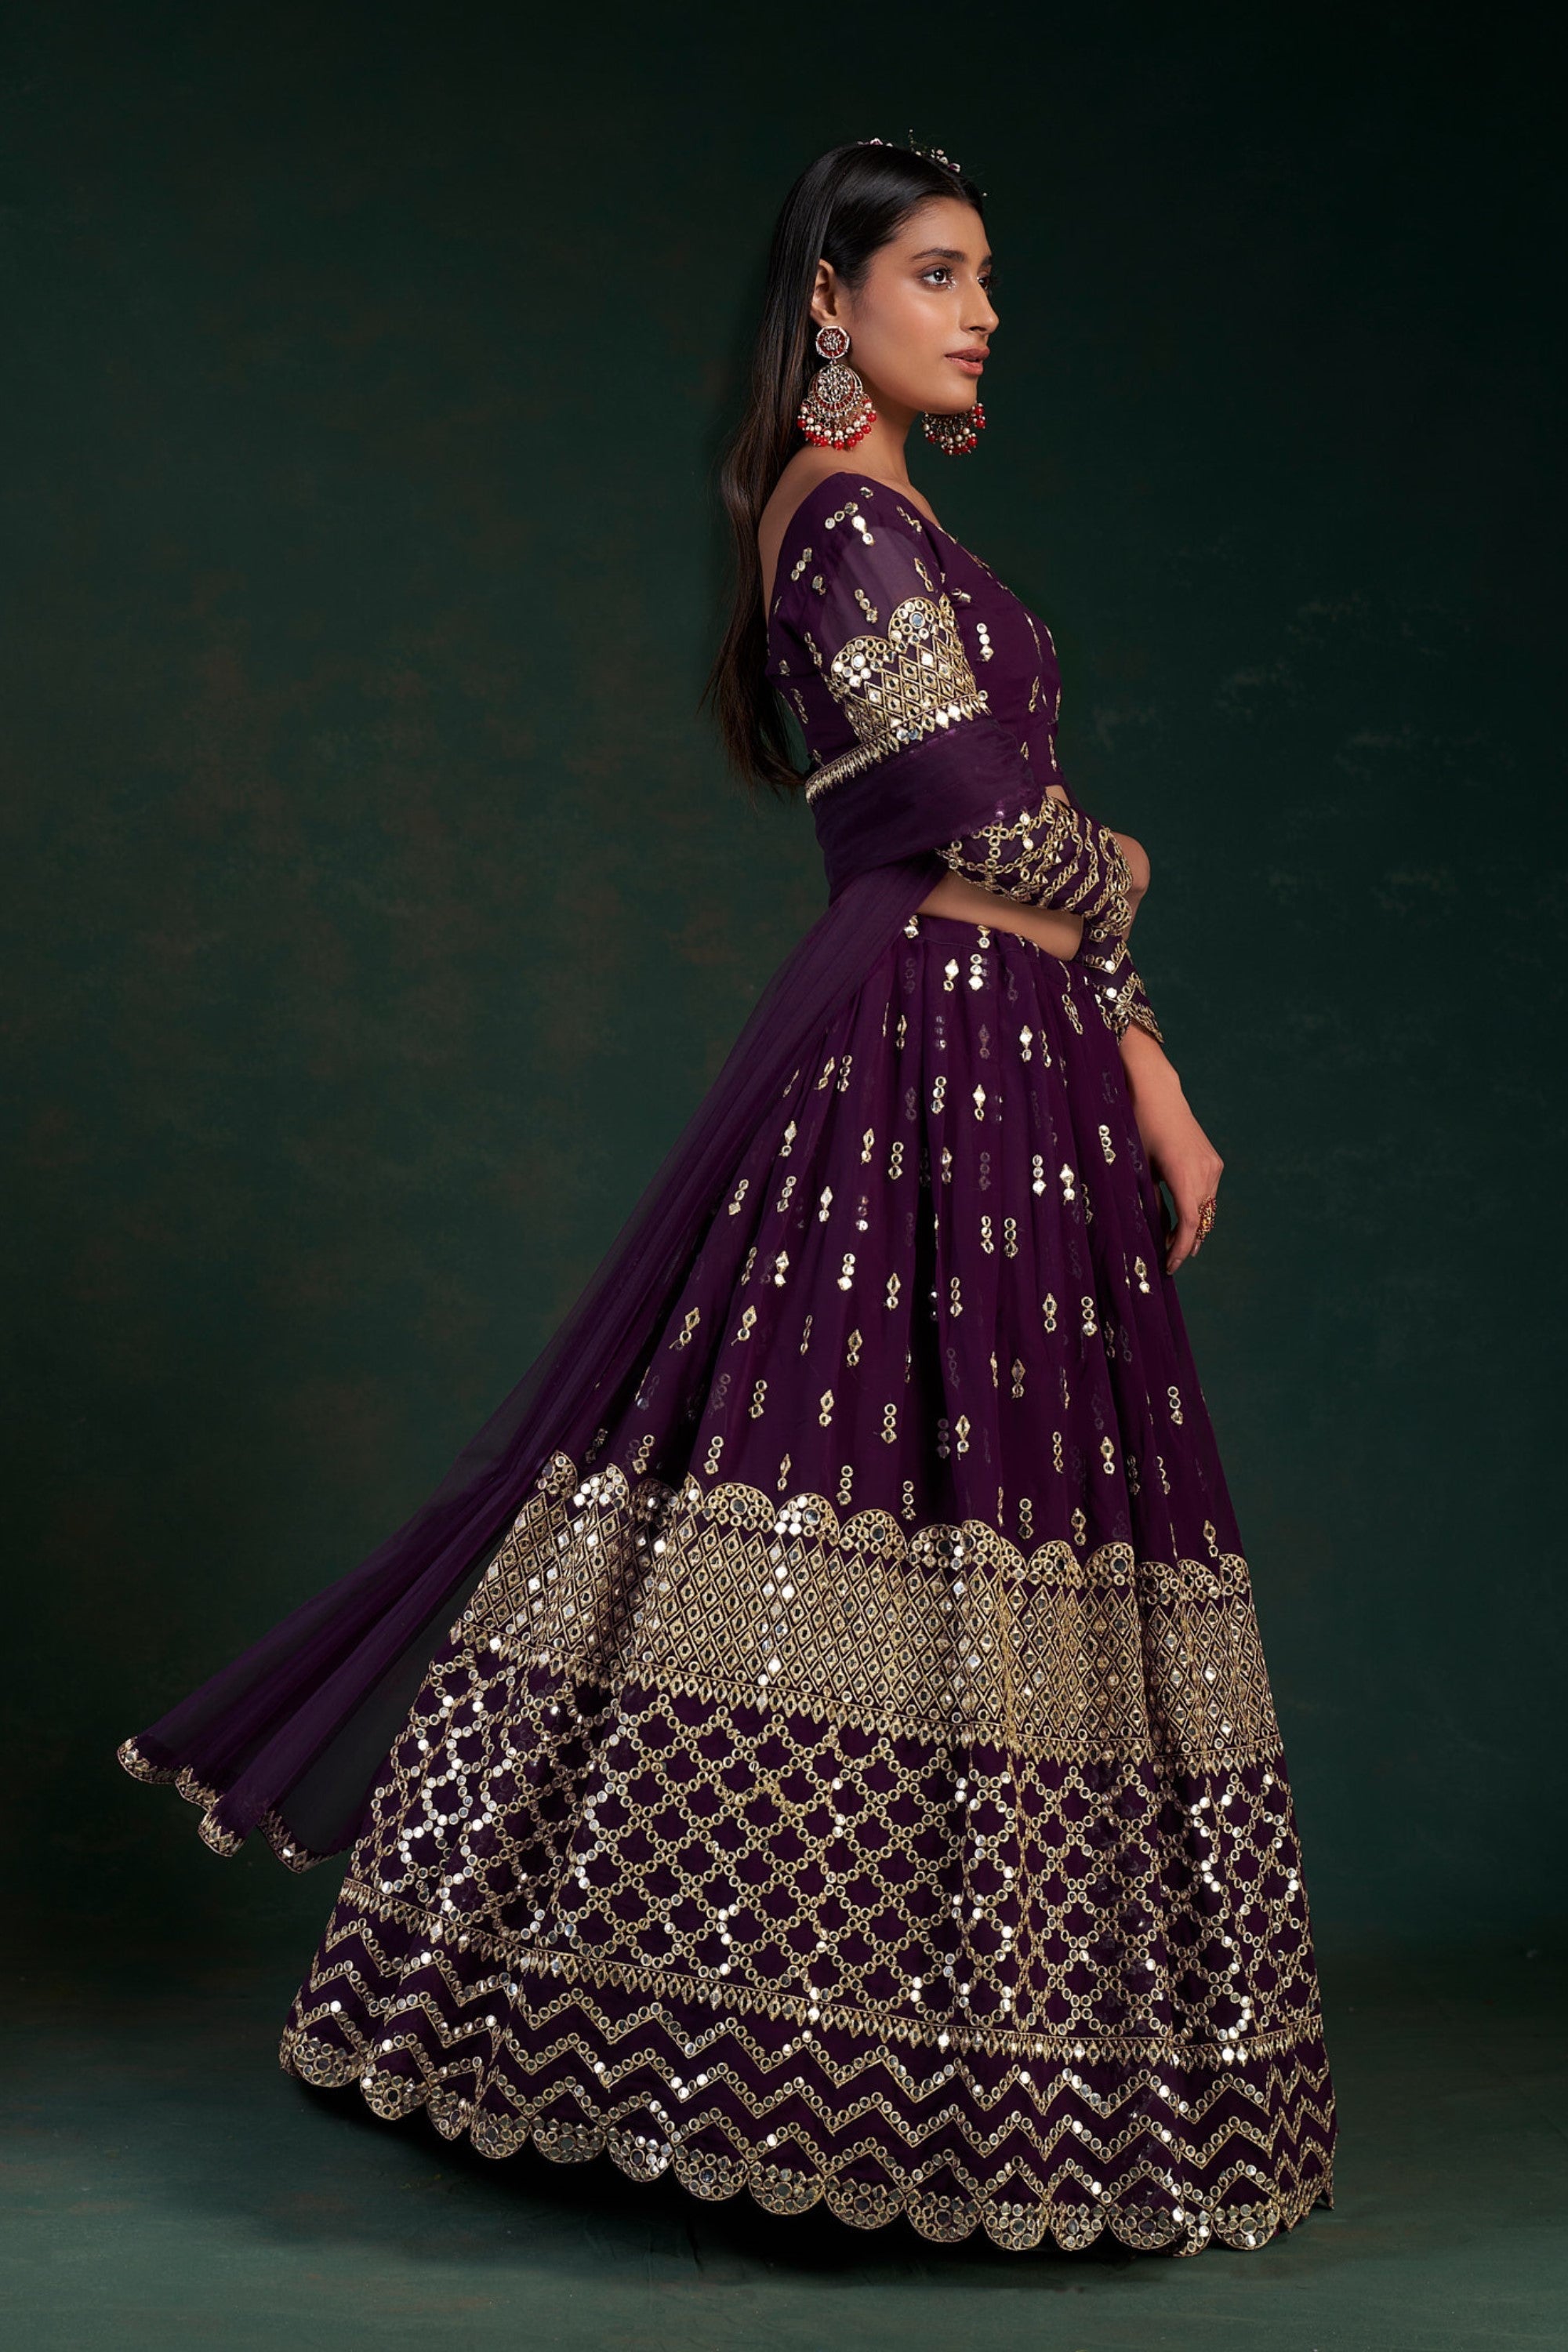 30 Long Blouse Designs For Lehenga: The Perfect Way To Flaunt Your Curves